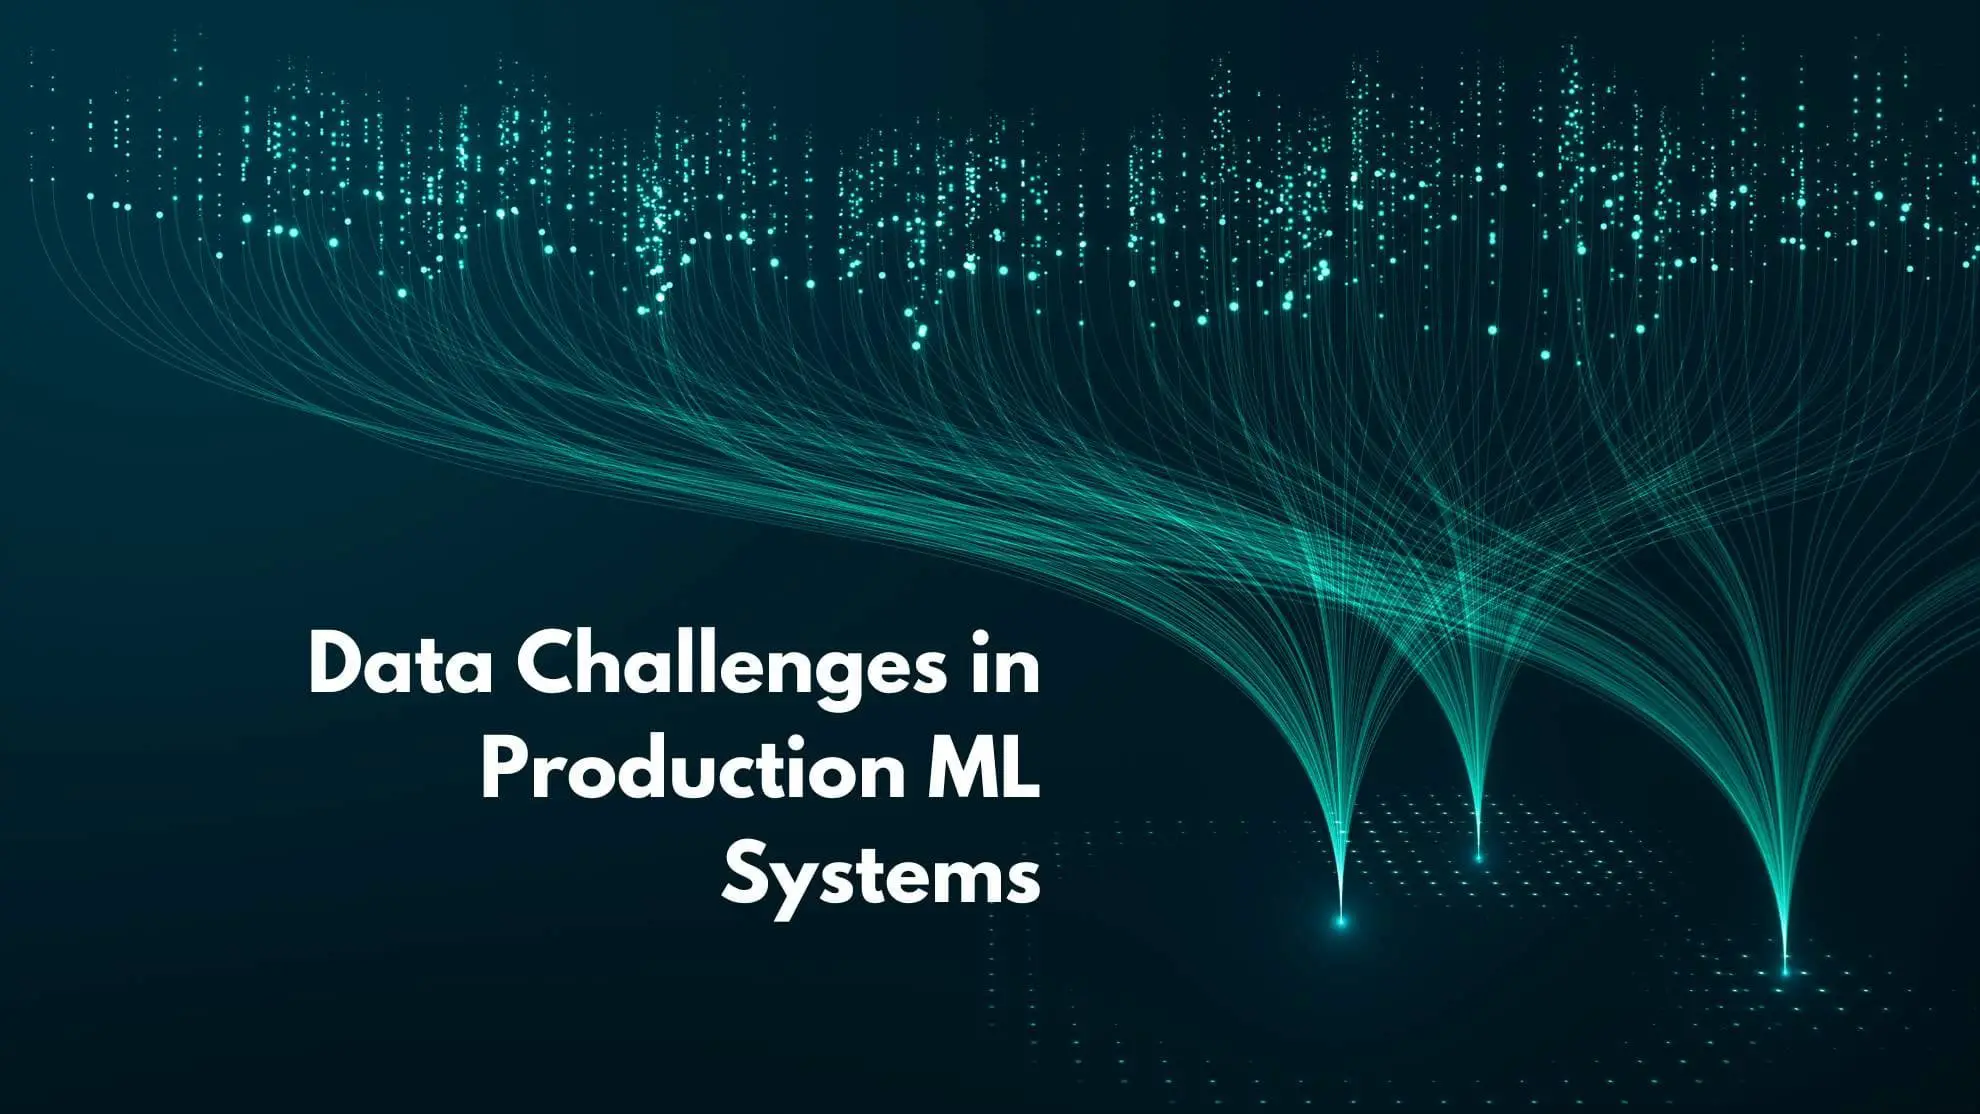 Data challenges in Production ML Systems. | Production ML Systems | 1